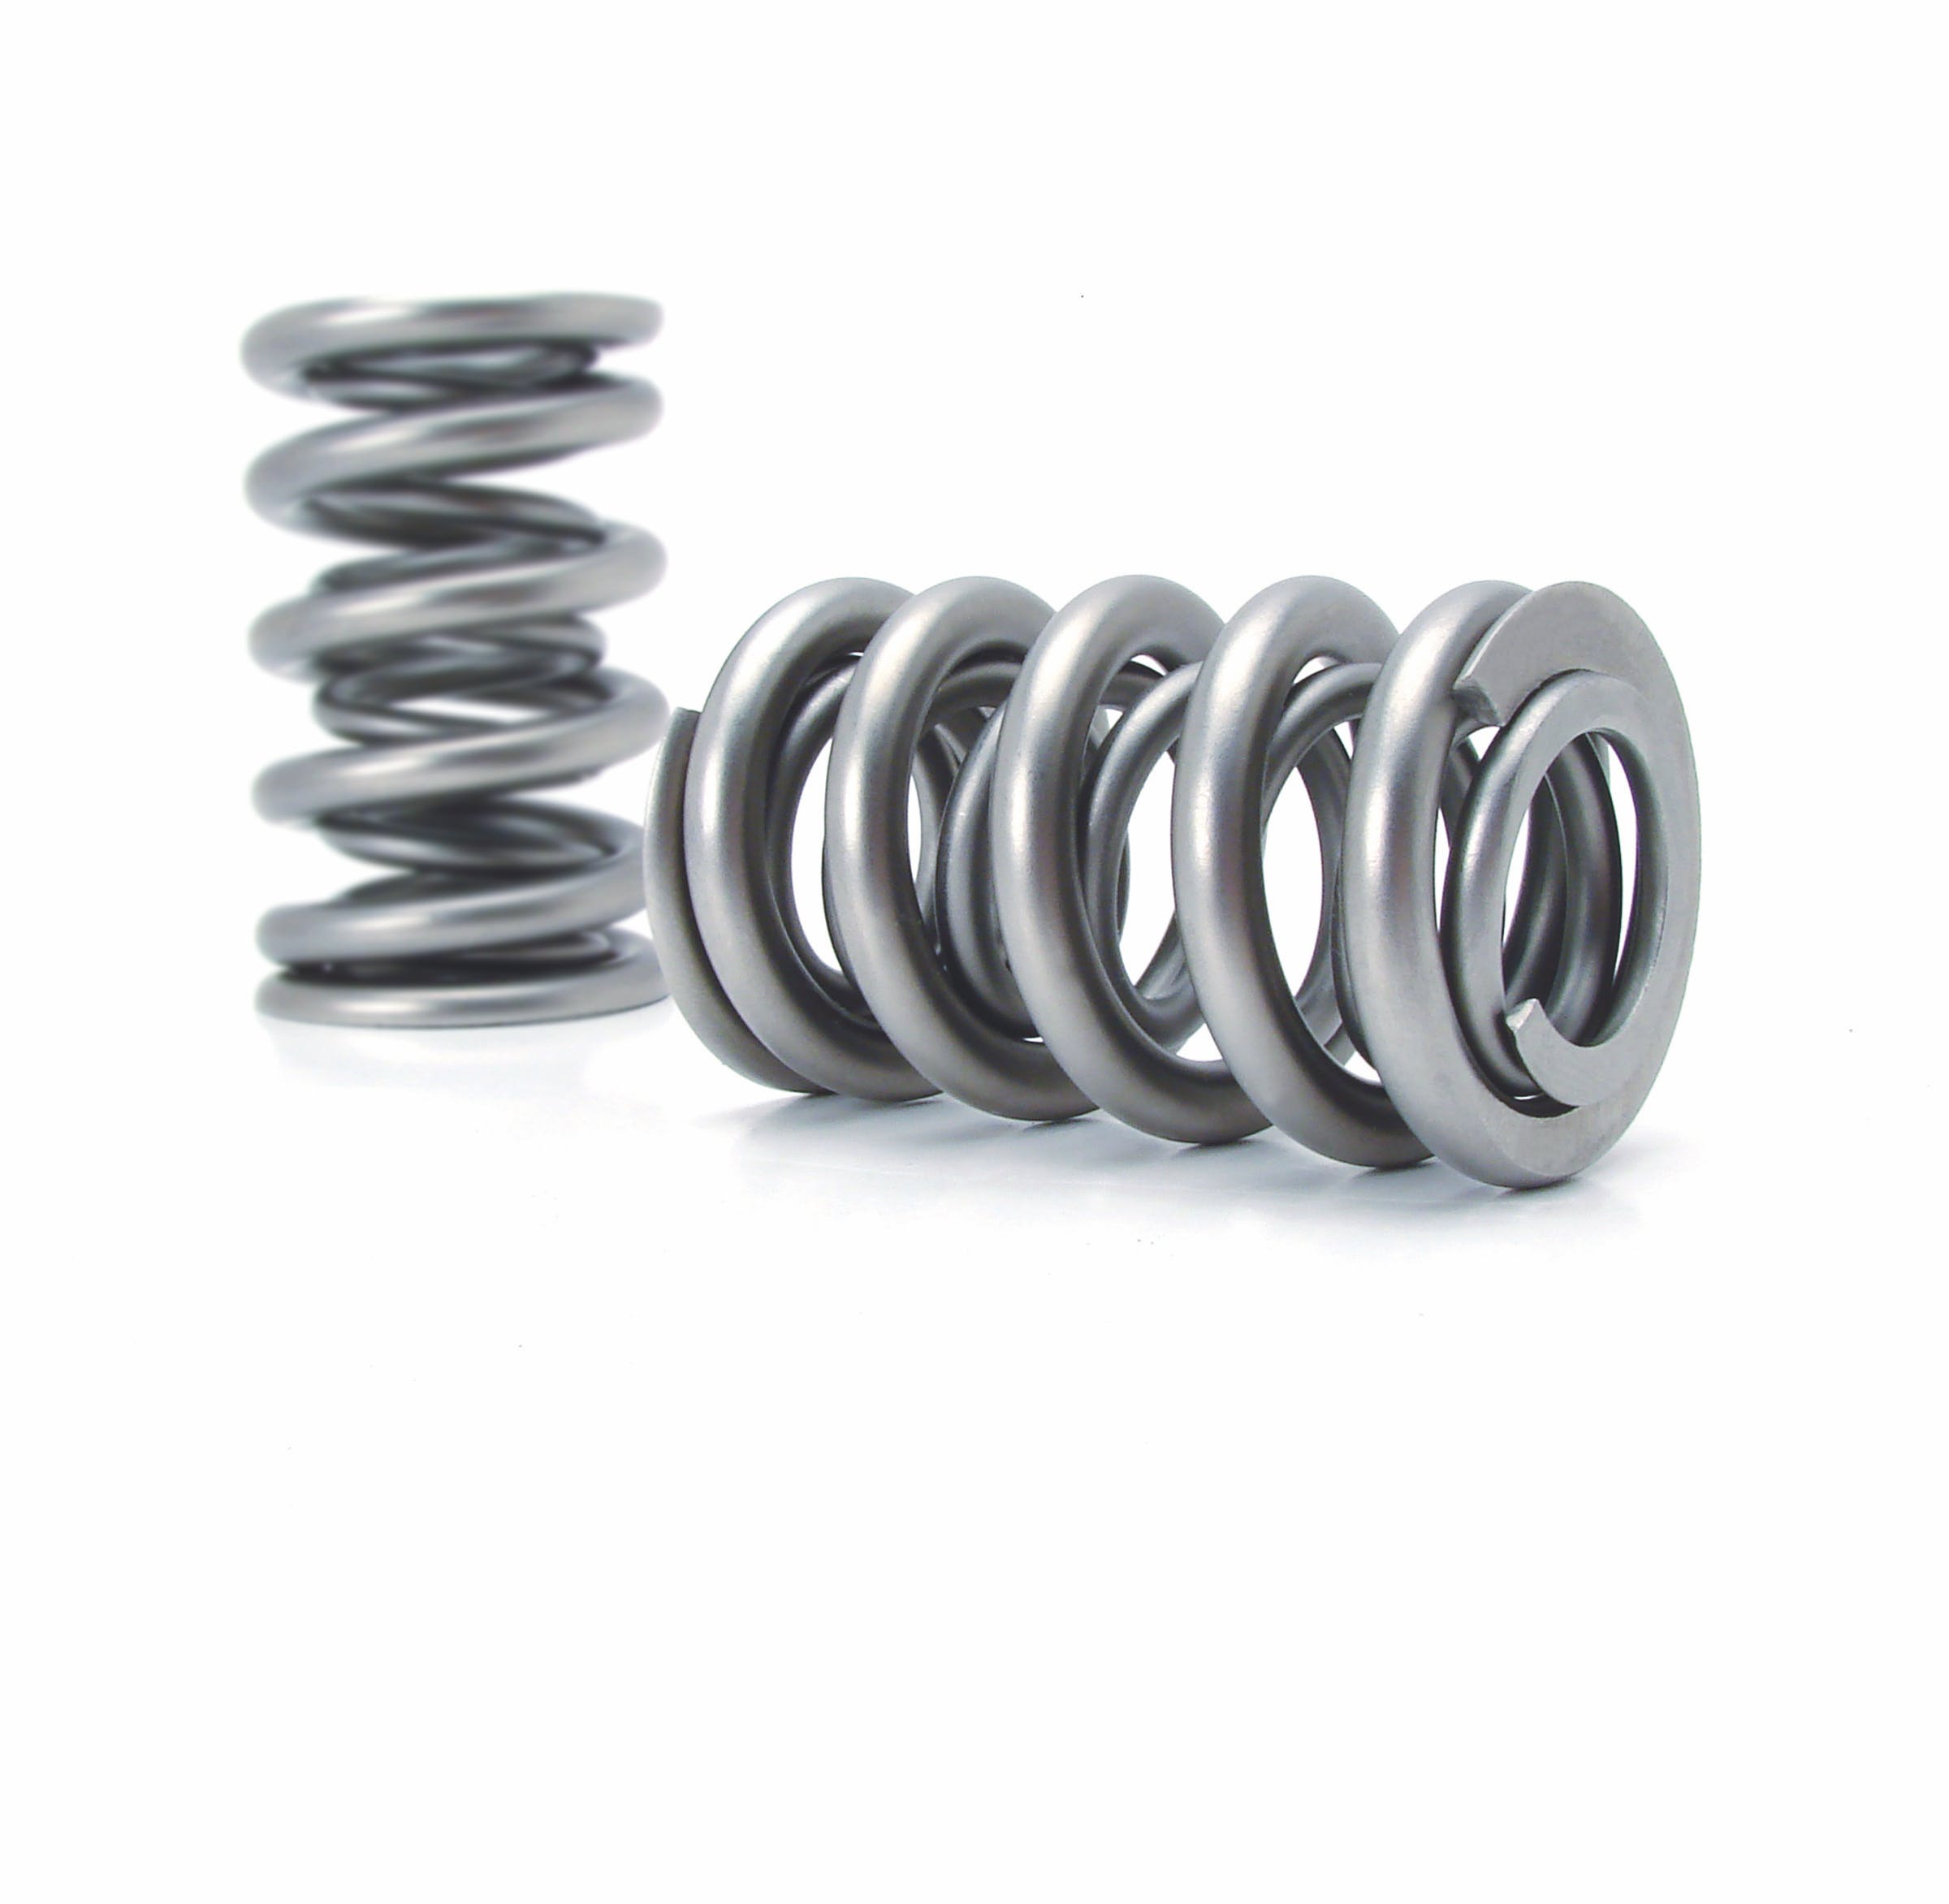 Competition Cams 26527-1 .700 inch Max Lift Dual Valve Spring for GM LS7, LT1 and LT4 Engines